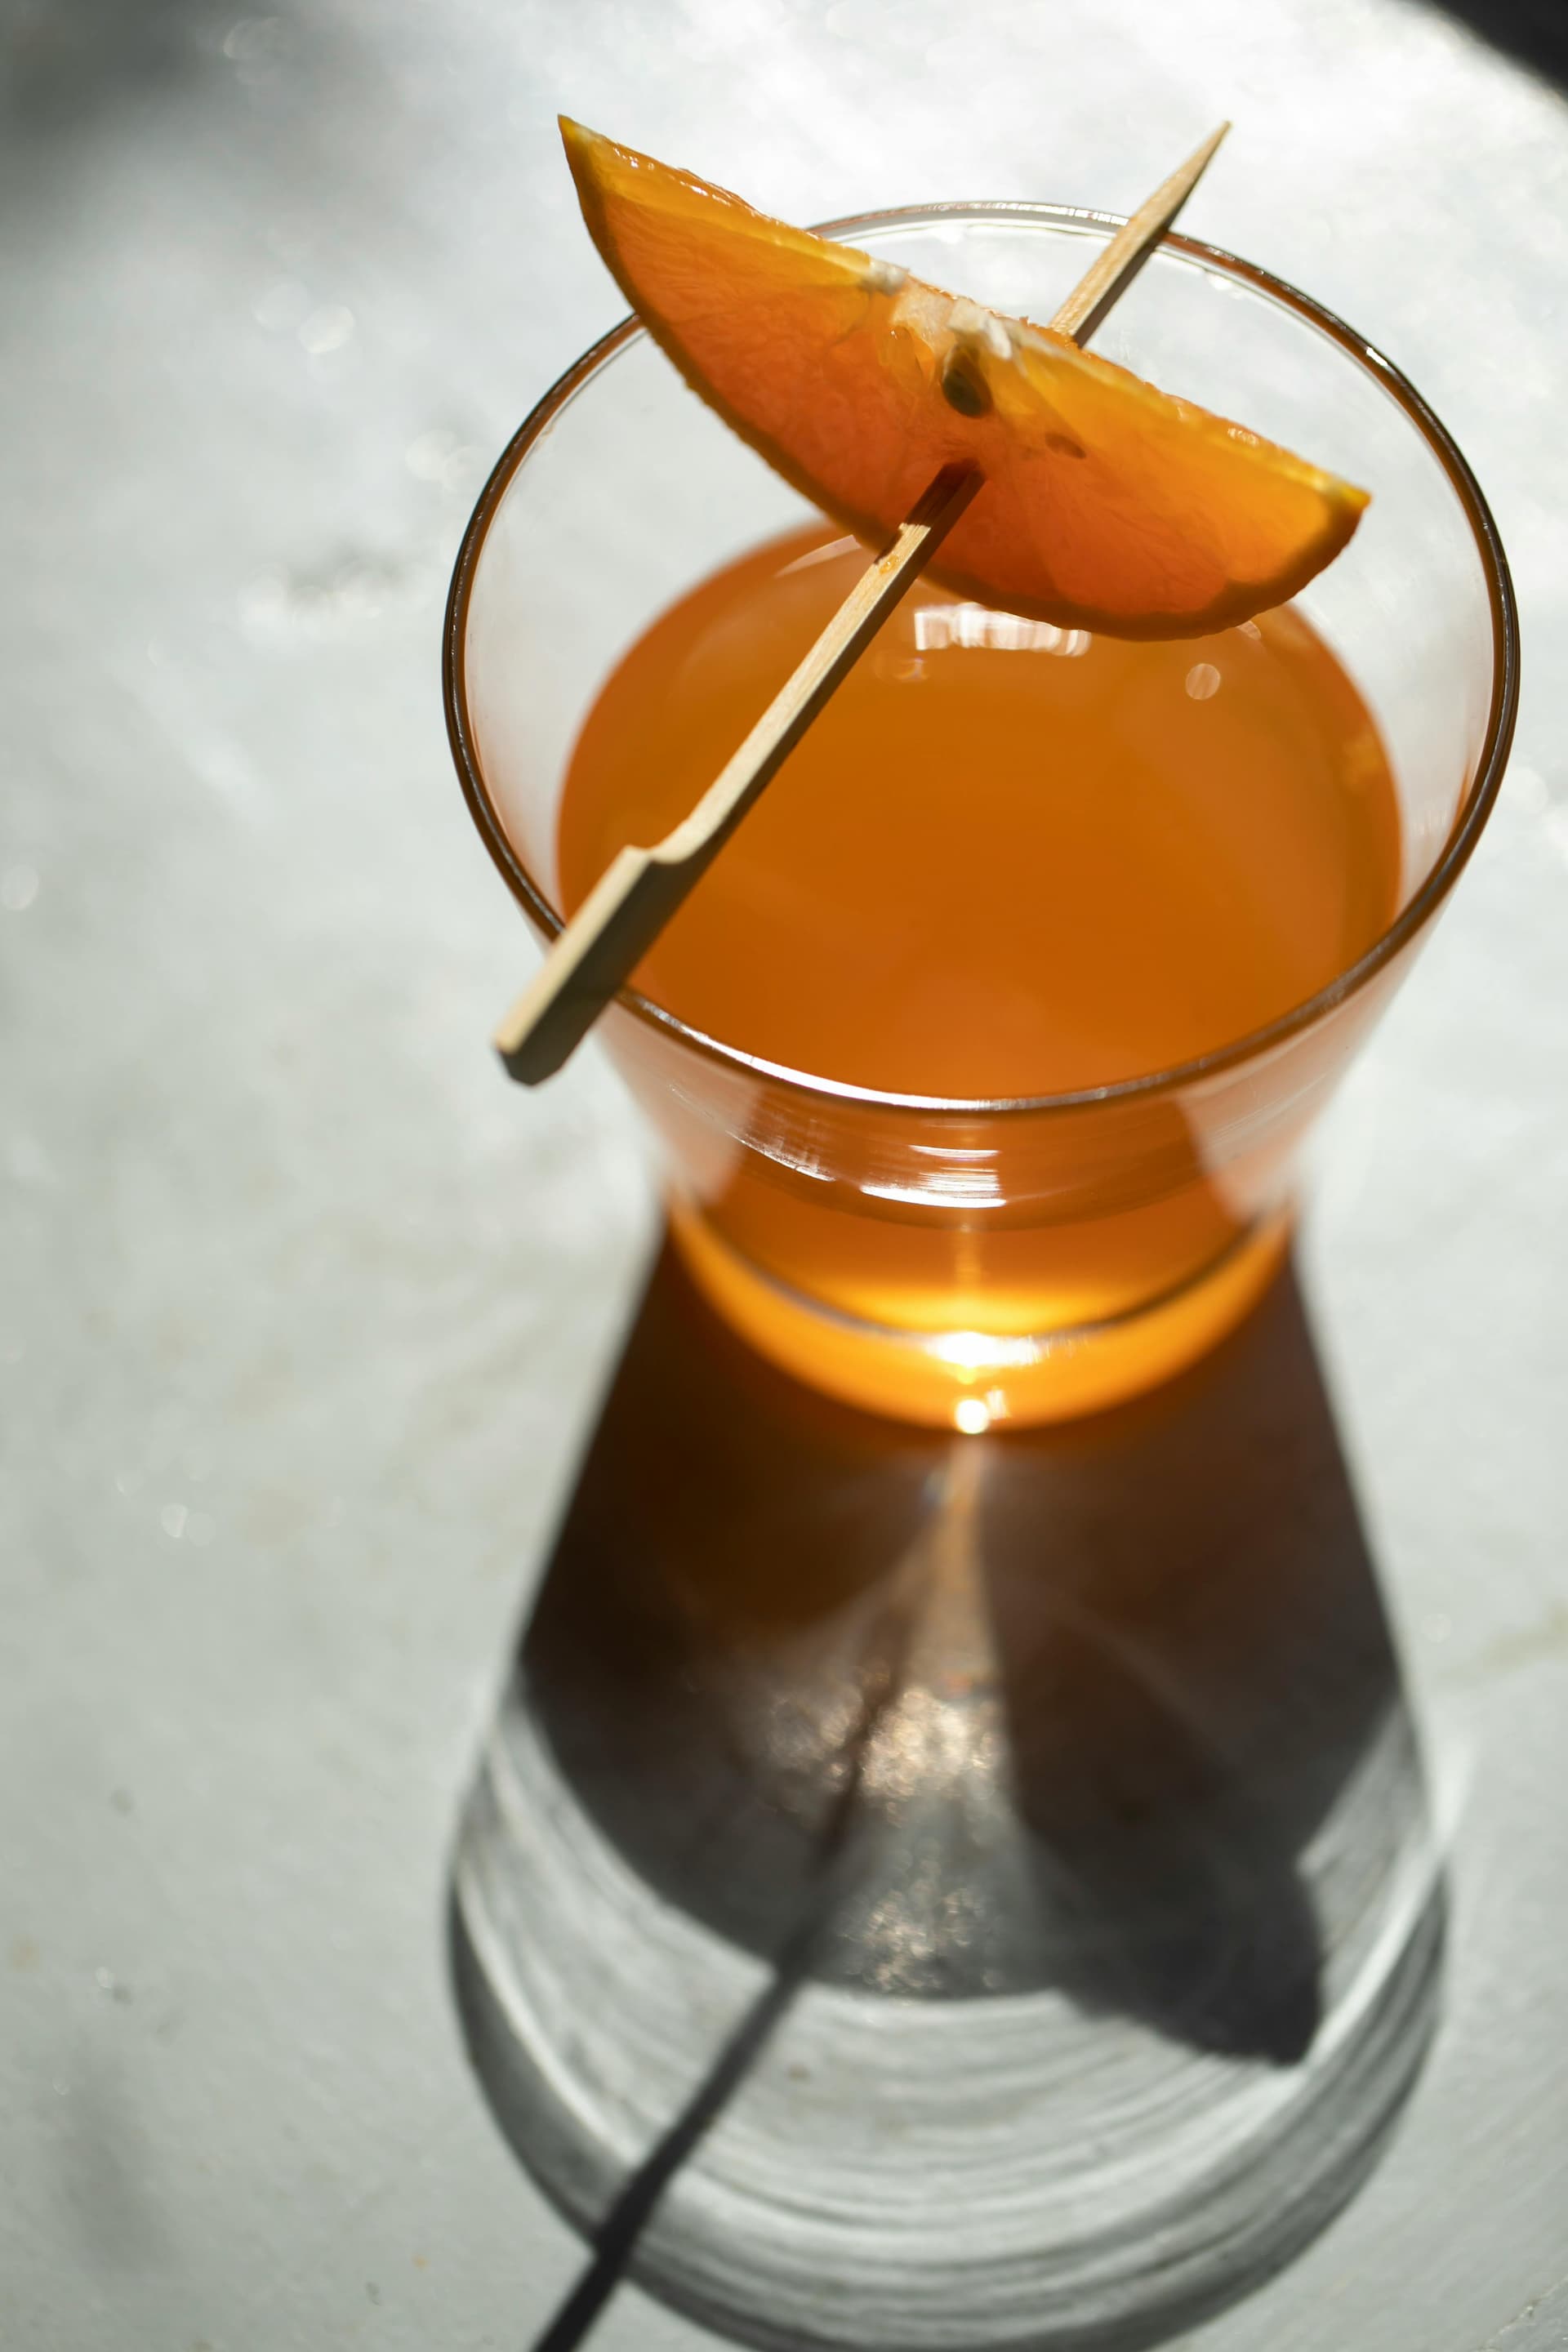 https://in.thebar.com/articles/5-amaretto-cocktails-that-go-beyond-the-standard-sour